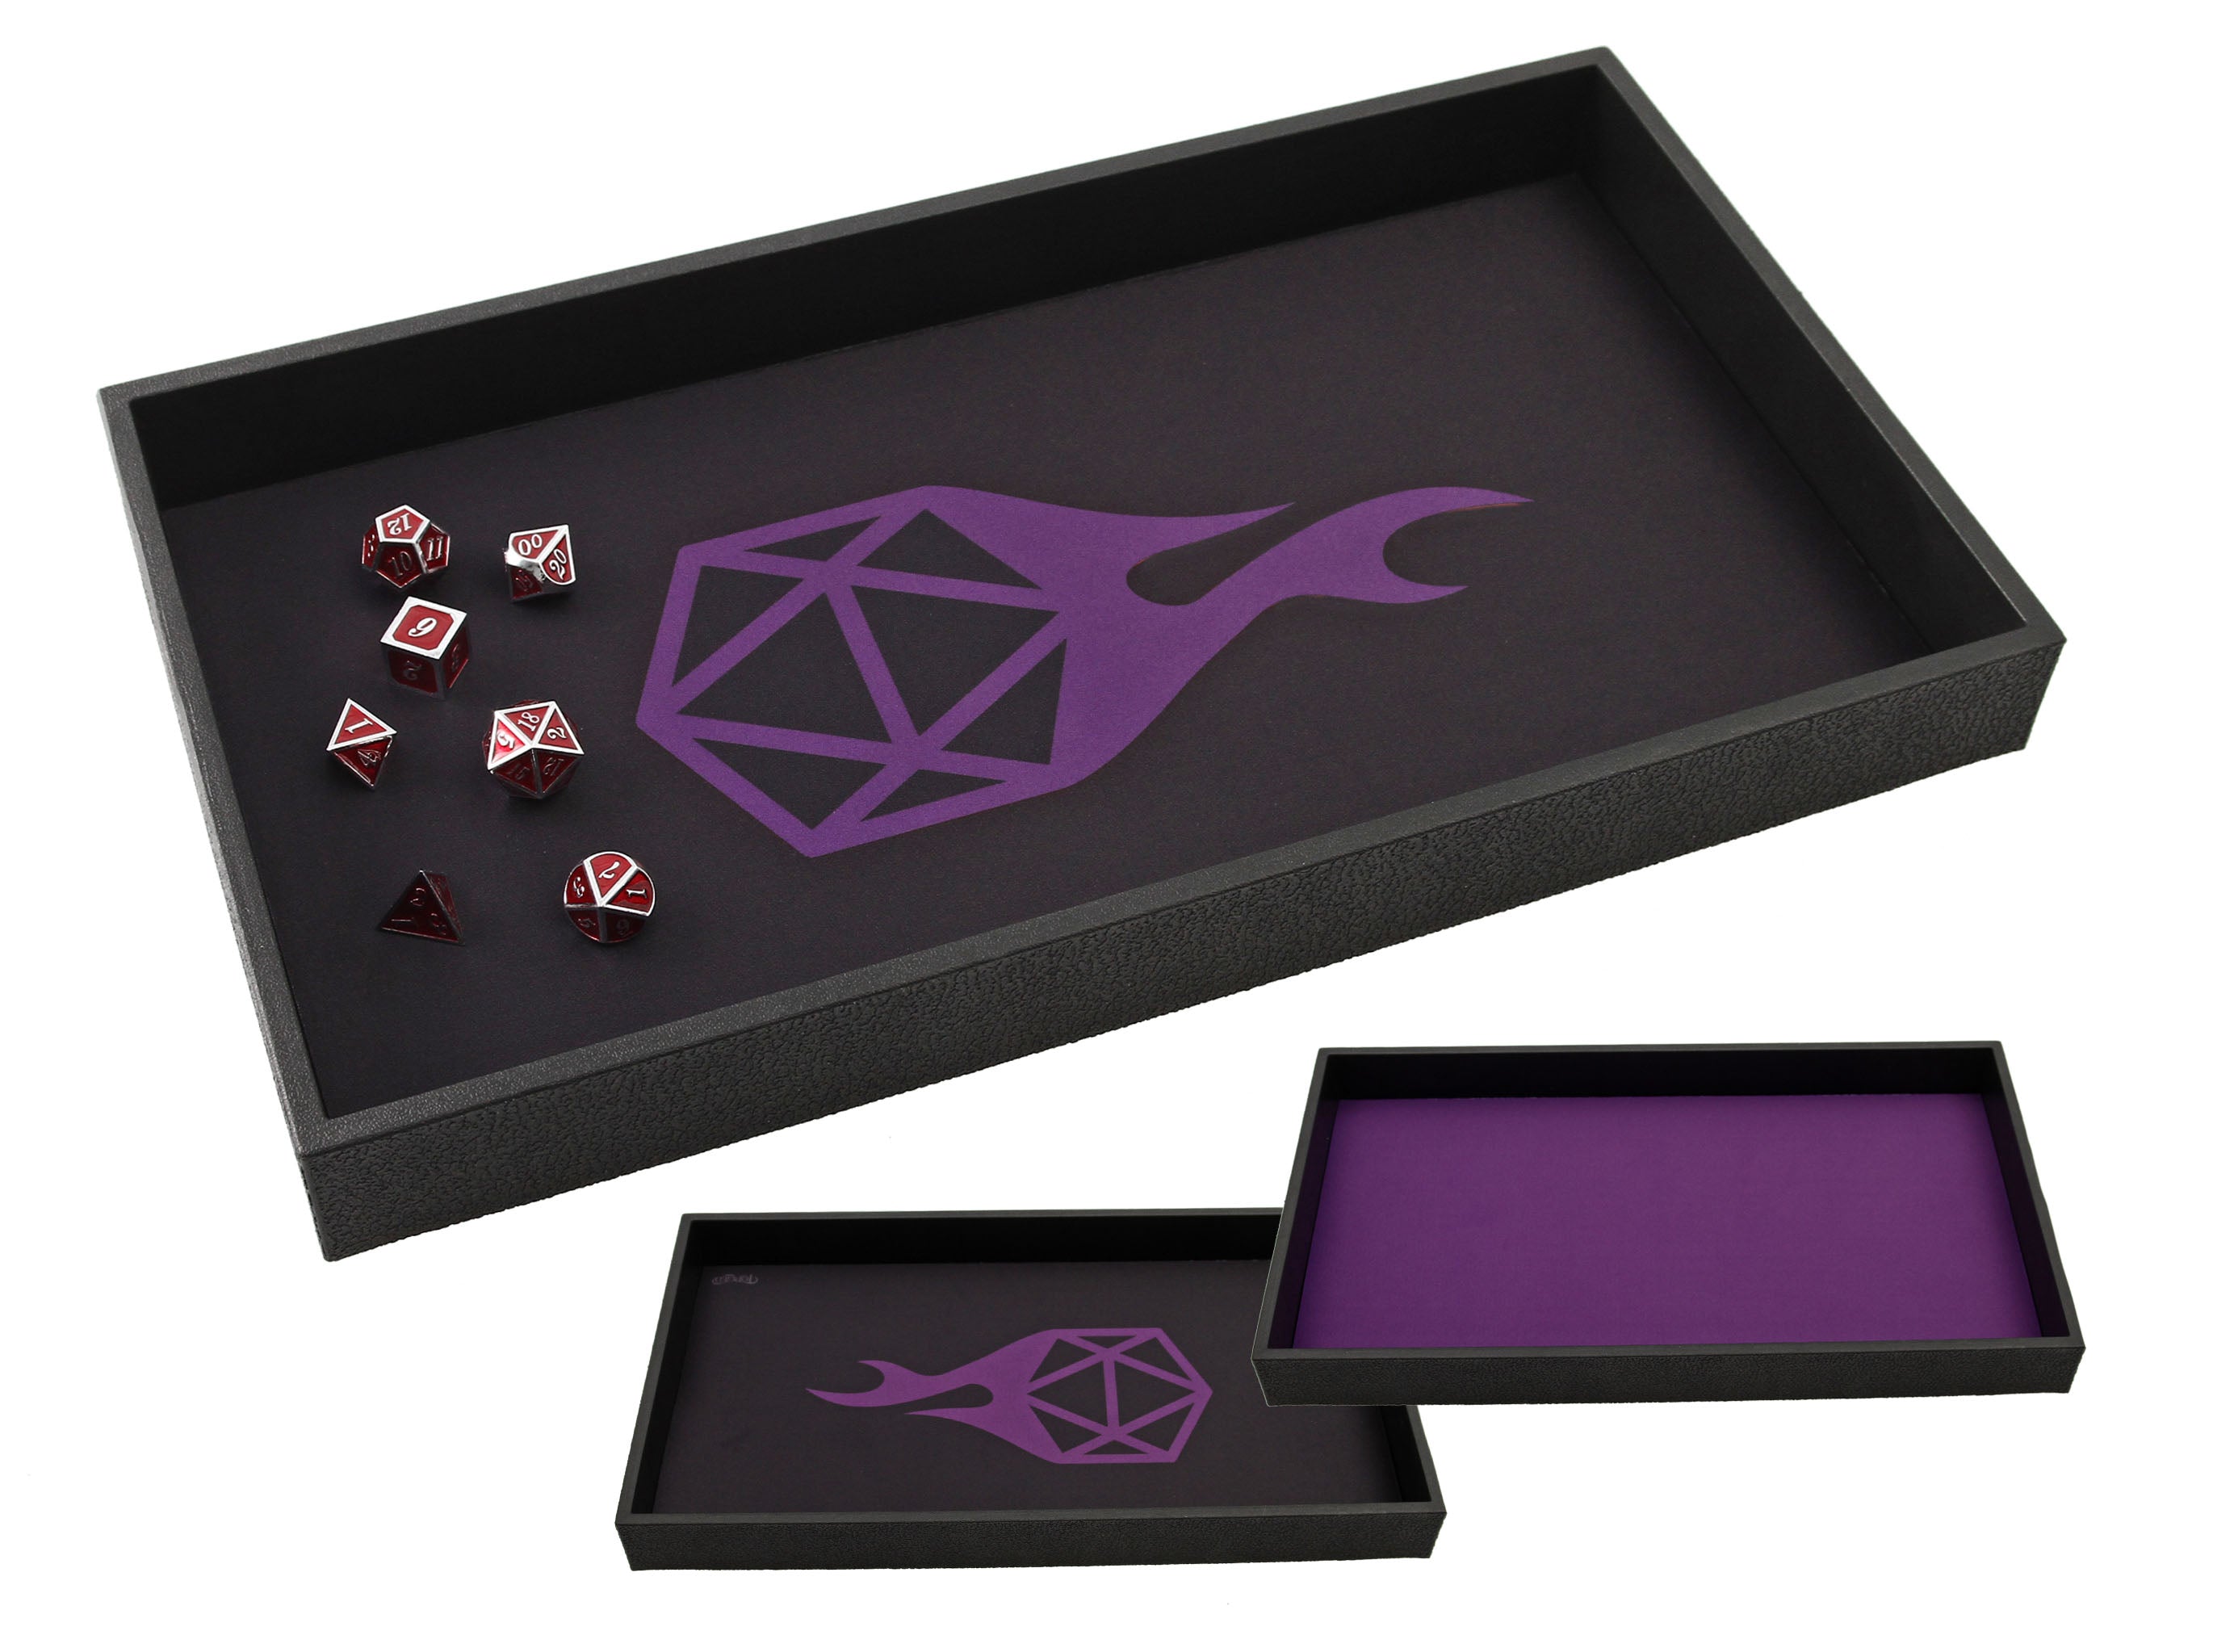 6 Top Tips for Choosing Dice Trays